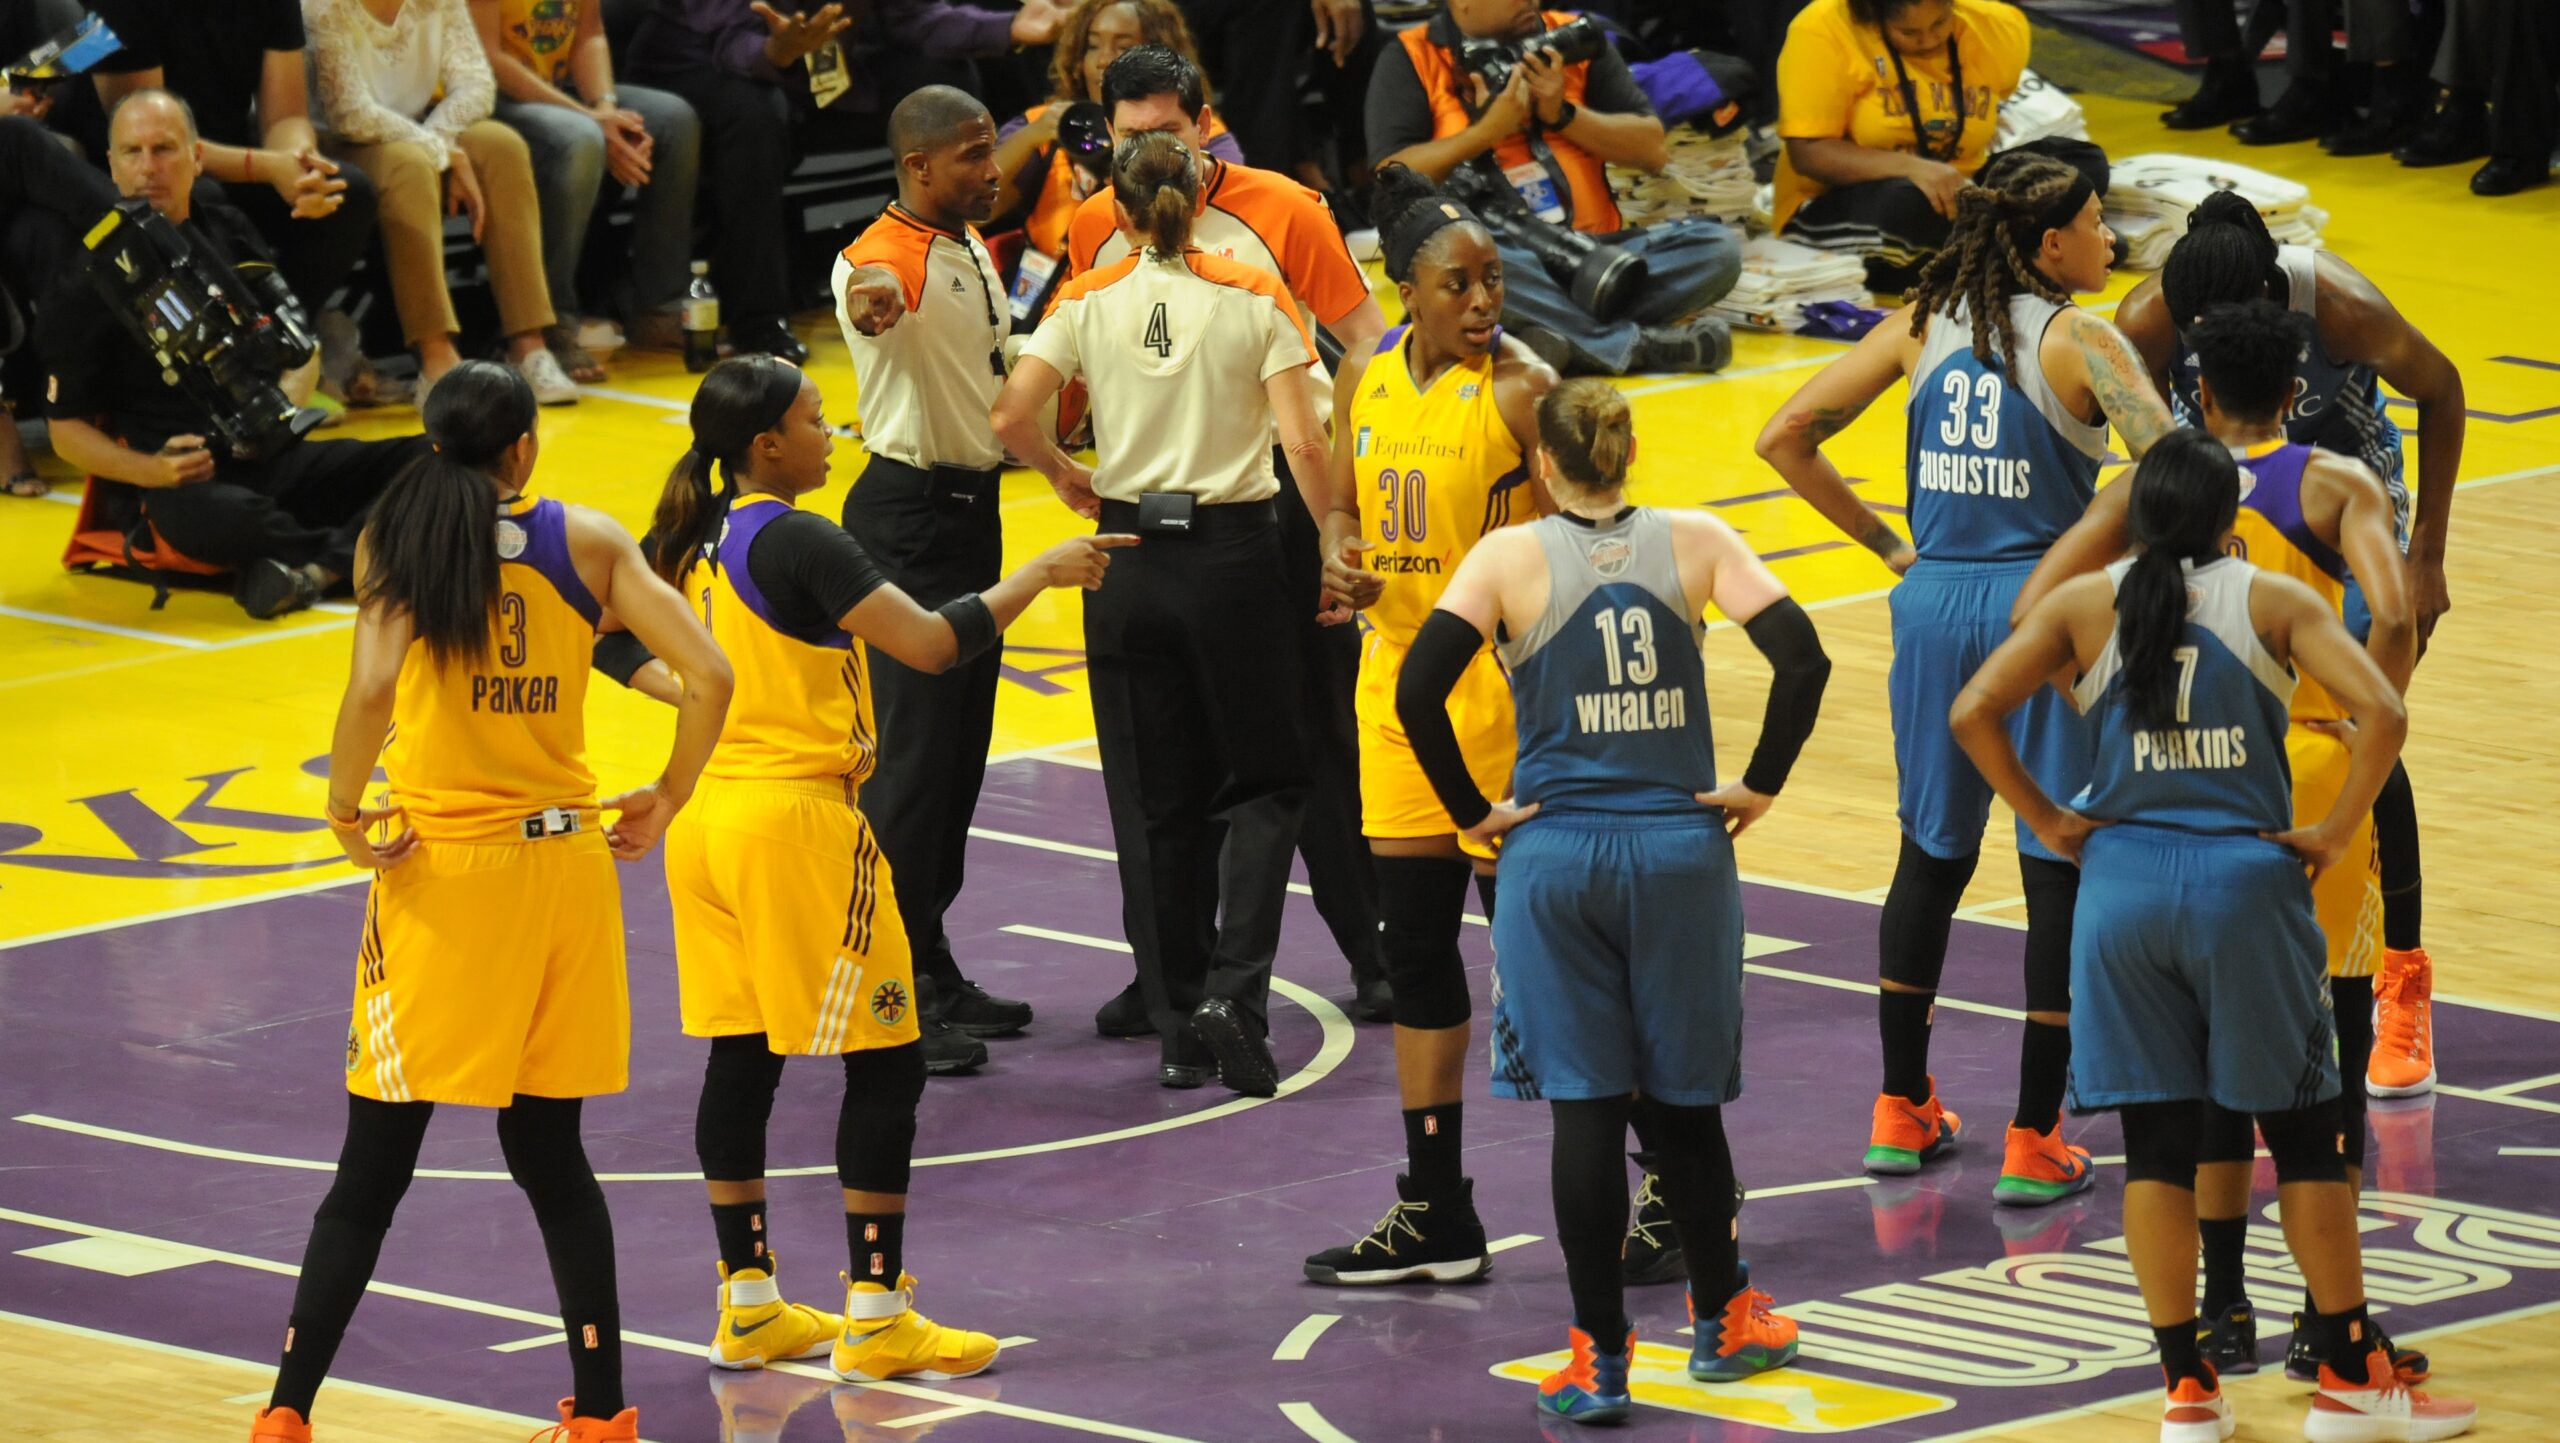 Los Angeles Sparks a win away from 2017 championship, take 2-1 series lead over Minnesota Lynx